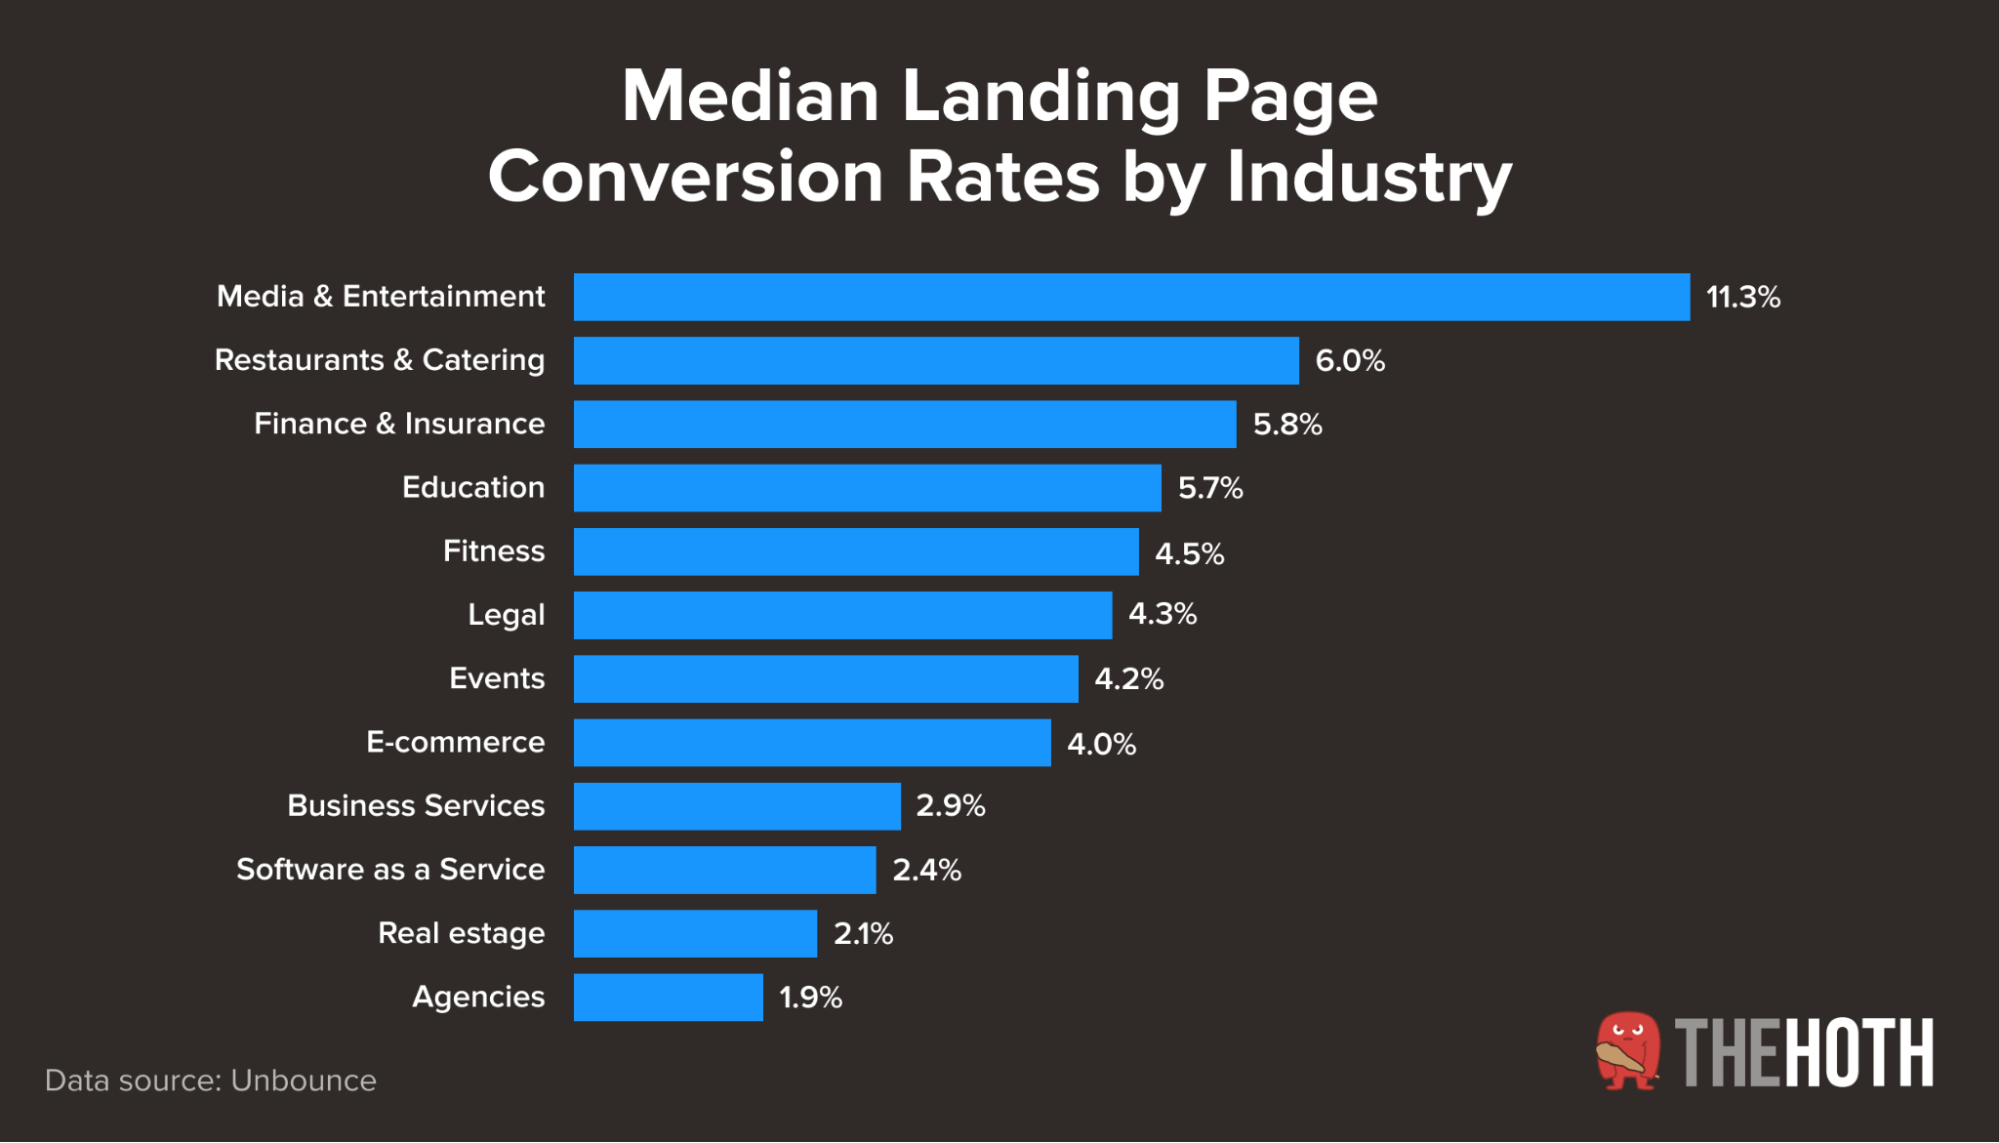 Chart showing median landing page conversion rates by industry